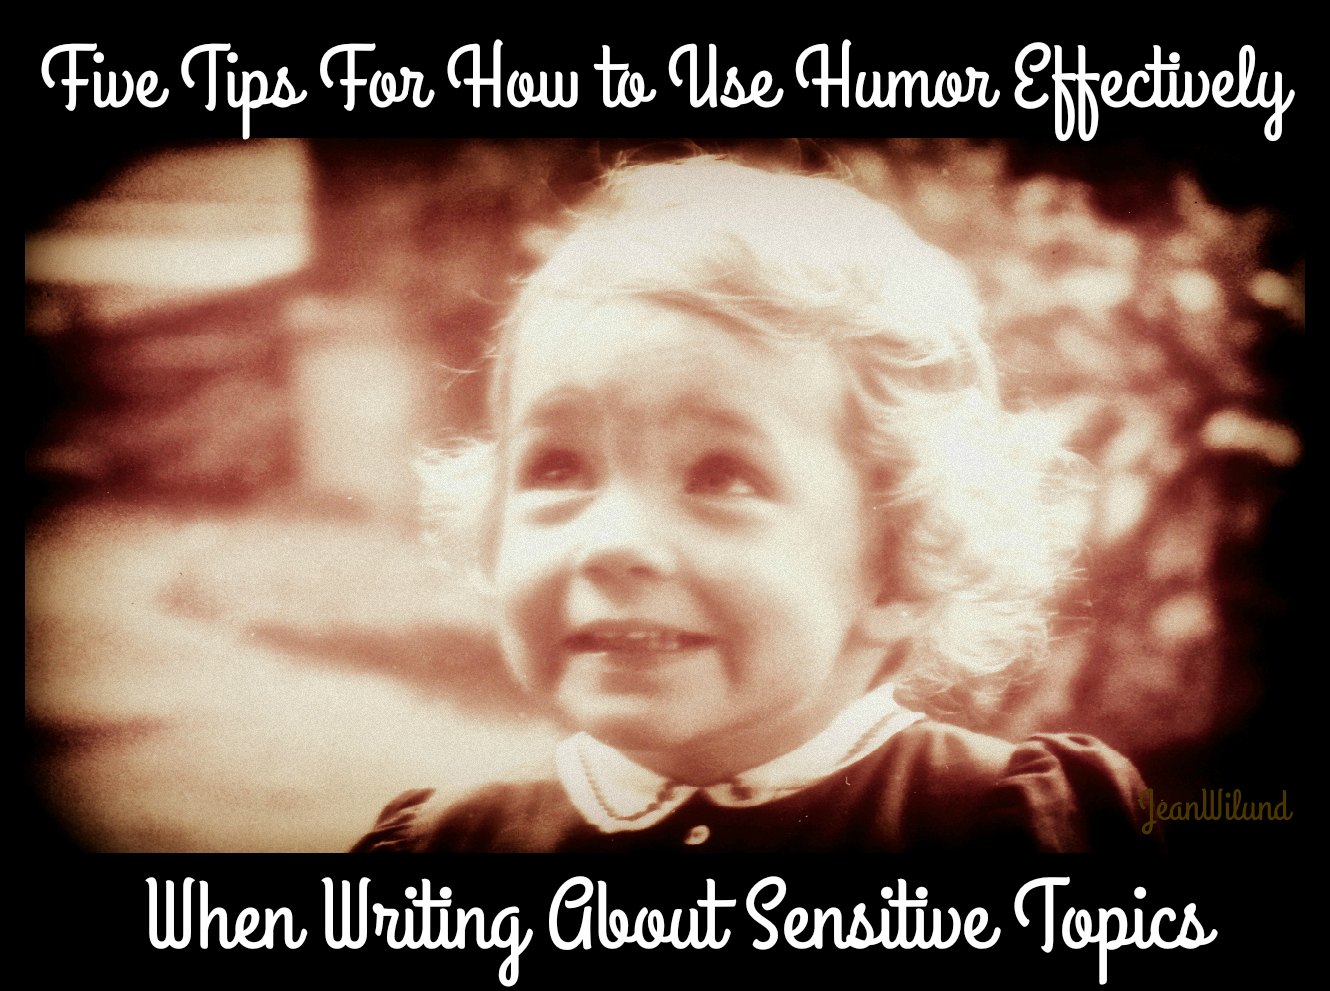 Five Tips for How to Use Humor Effectively When Writing About Sensitive Topics by Jean Wilund via www.AlmostAnAuthor.com